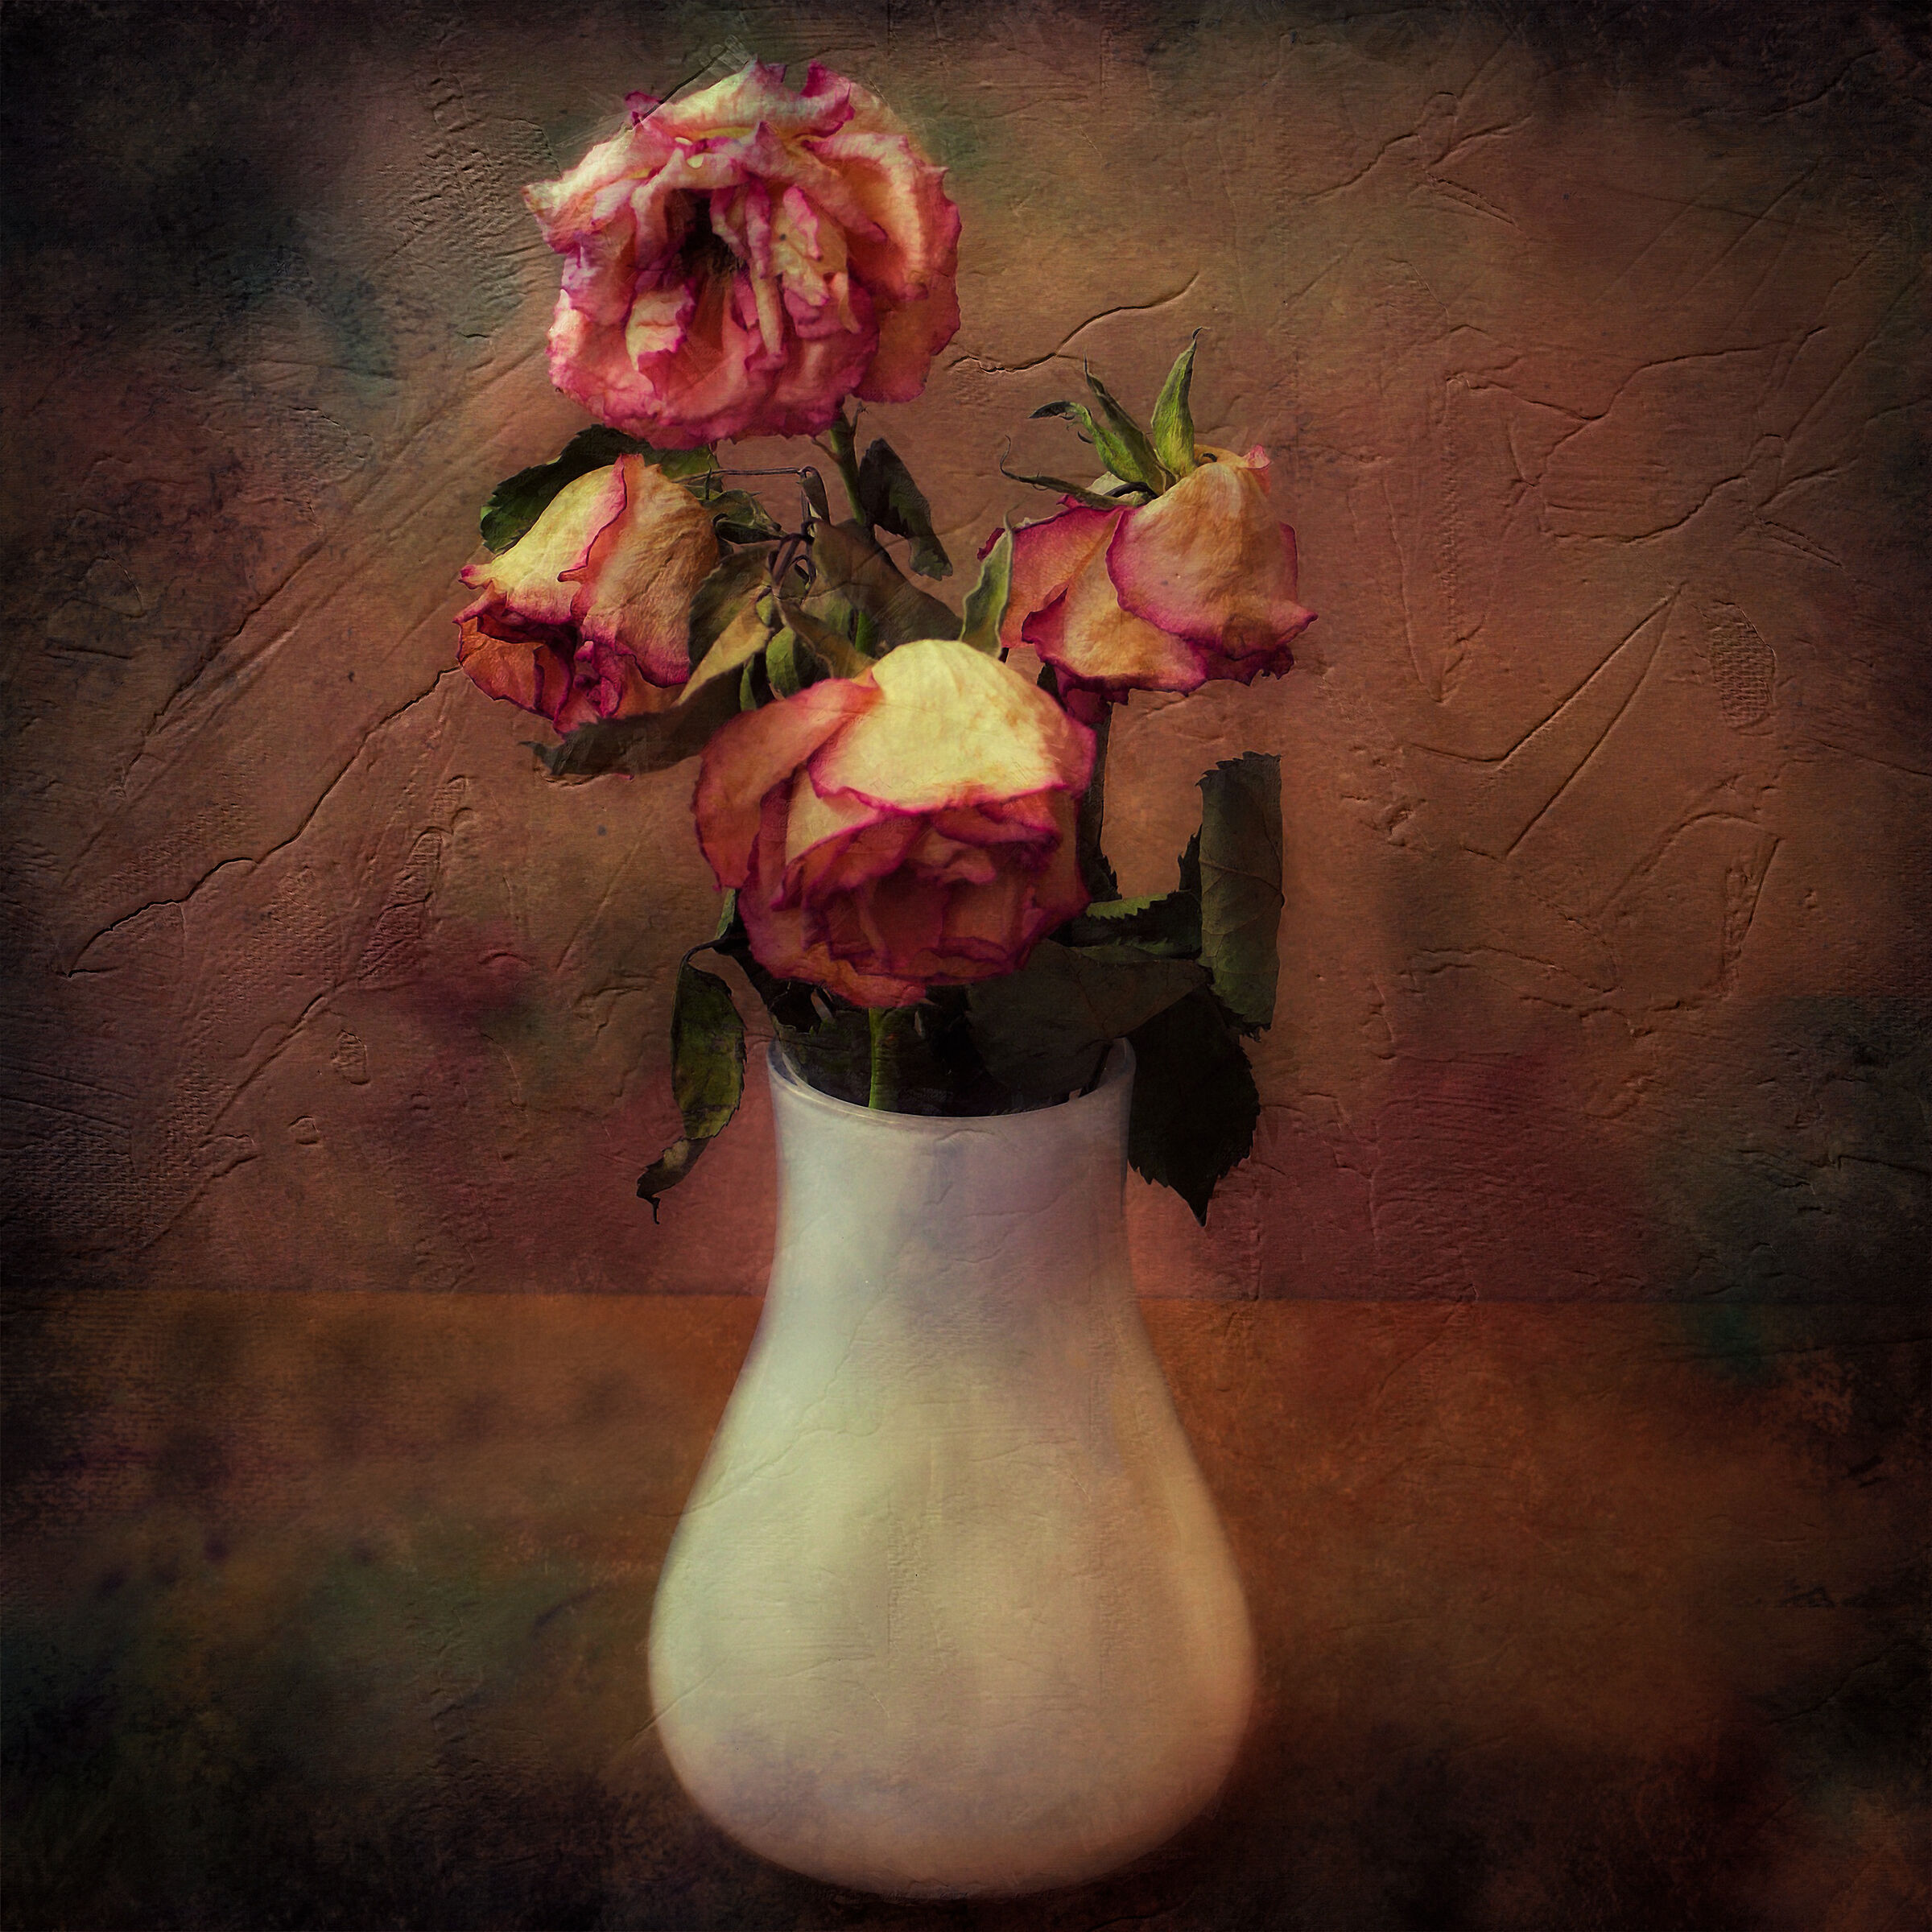 Roses at the end of life...